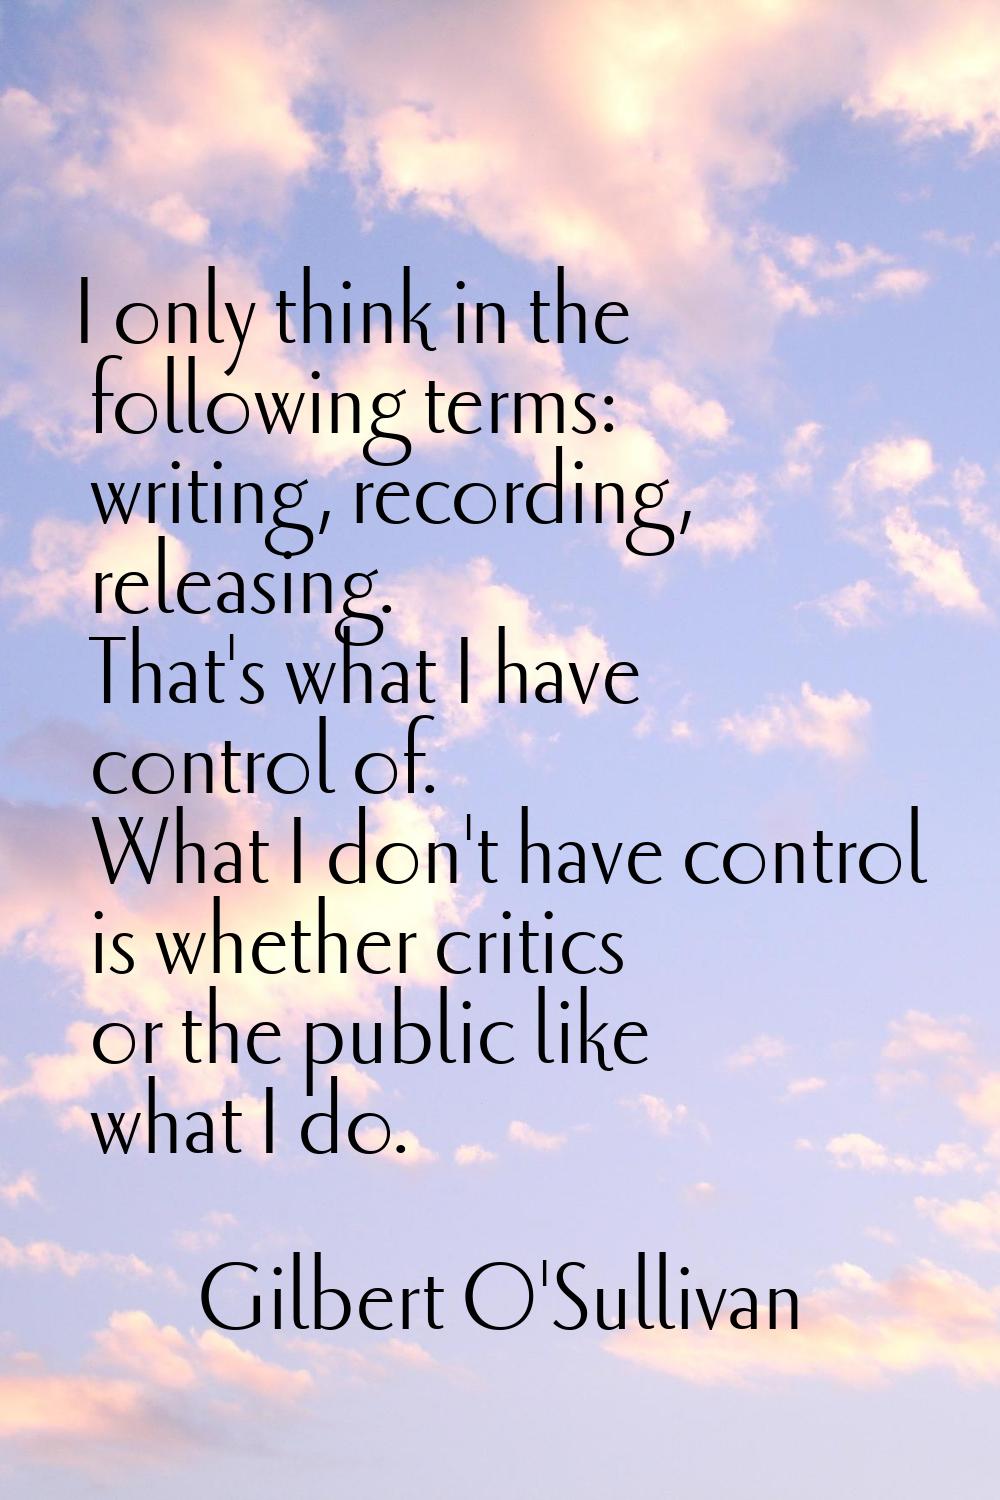 I only think in the following terms: writing, recording, releasing. That's what I have control of. 